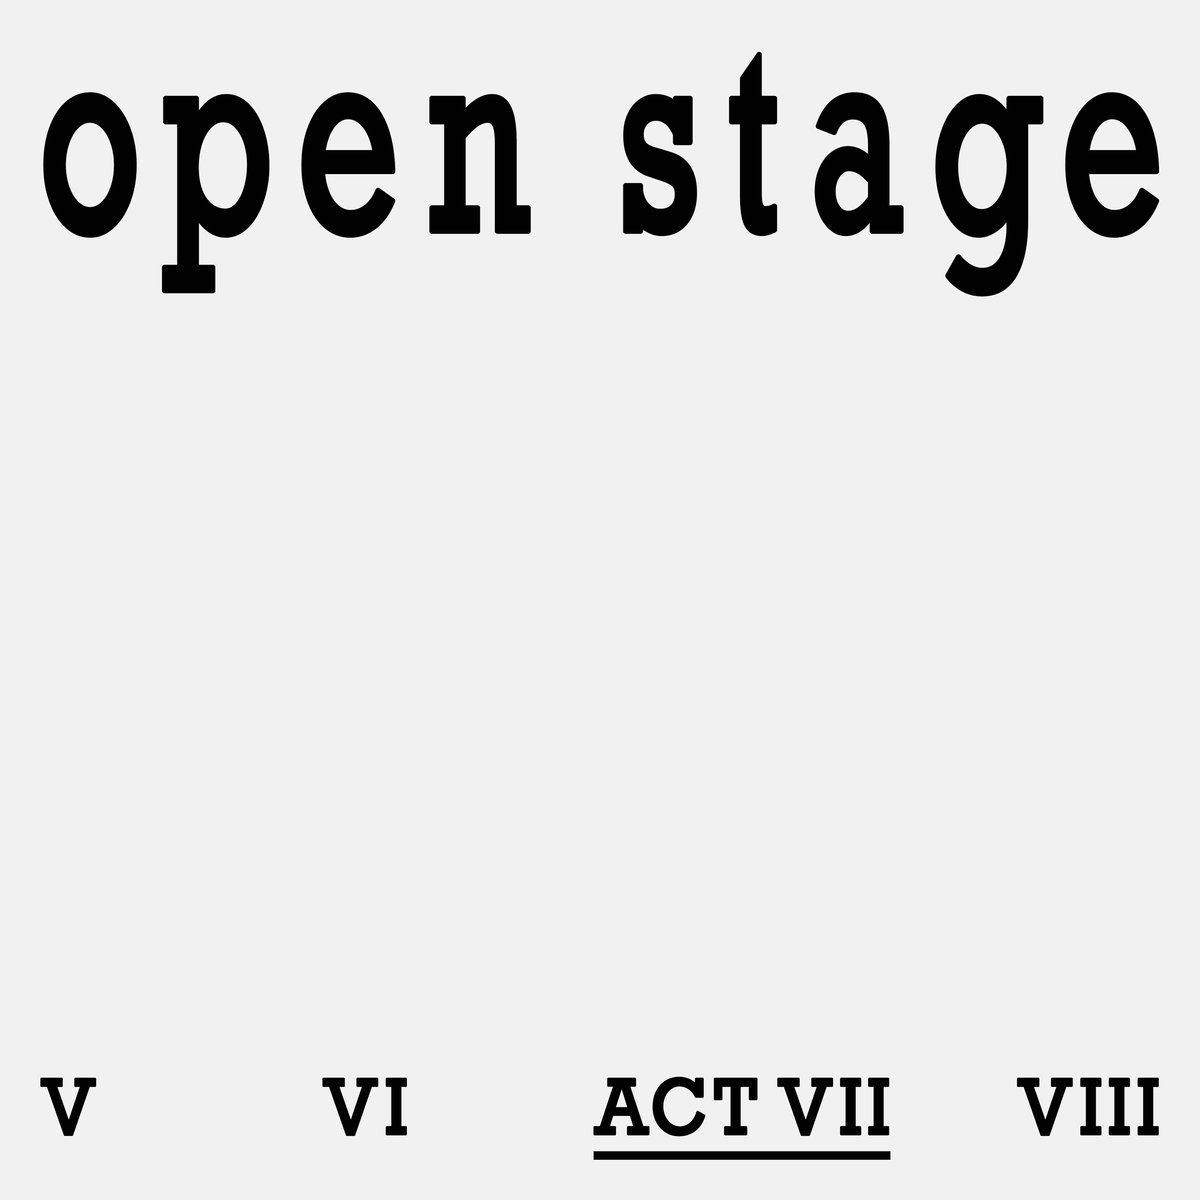 Image of VII: Open Stage